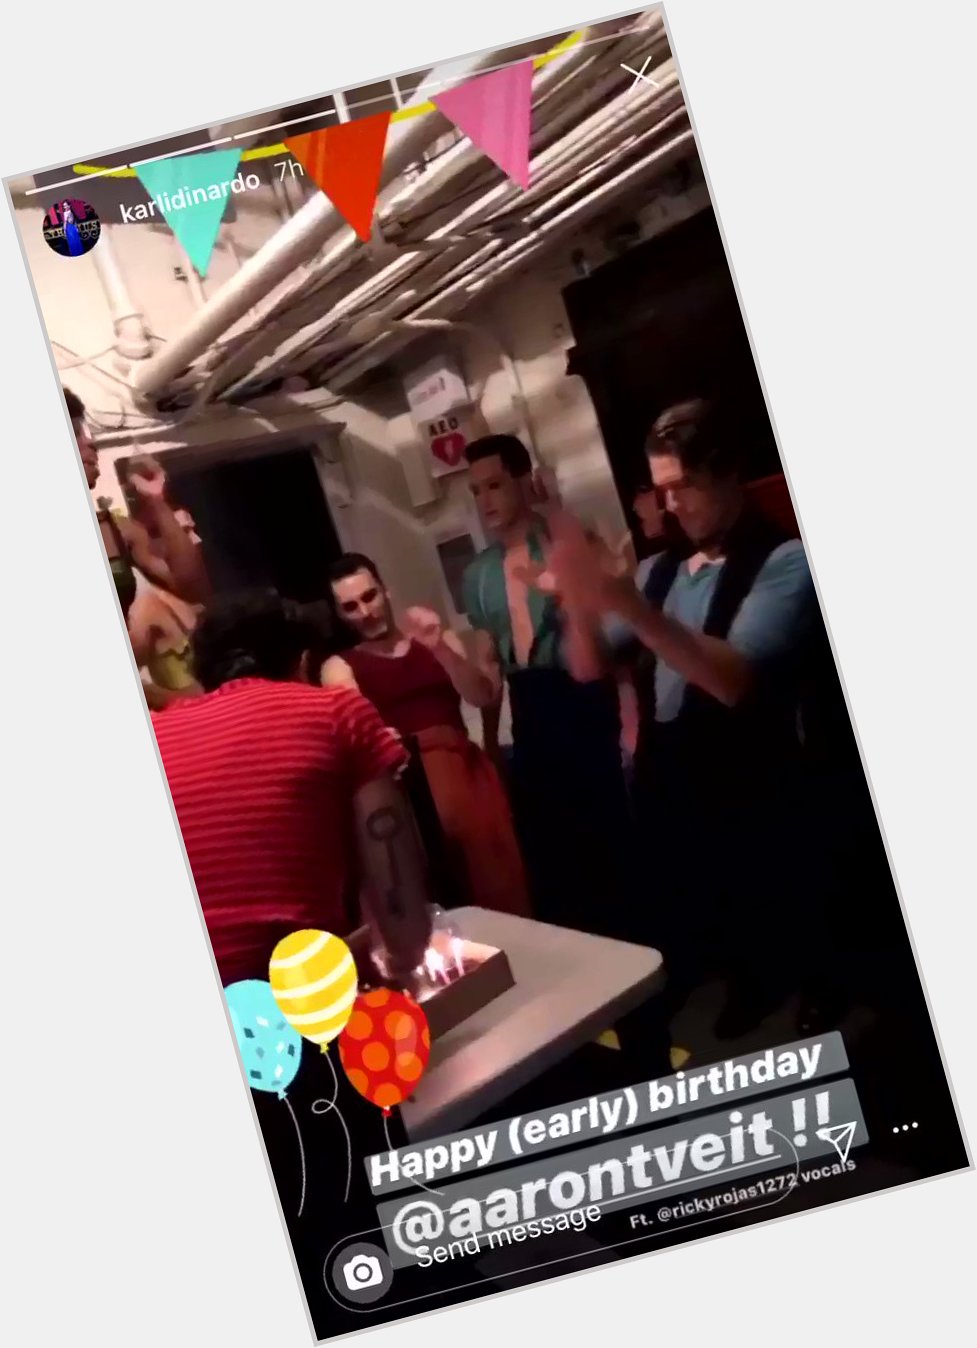 I\m glad to see that not even Aaron Tveit knows how to act when people sing Happy Birthday to him 